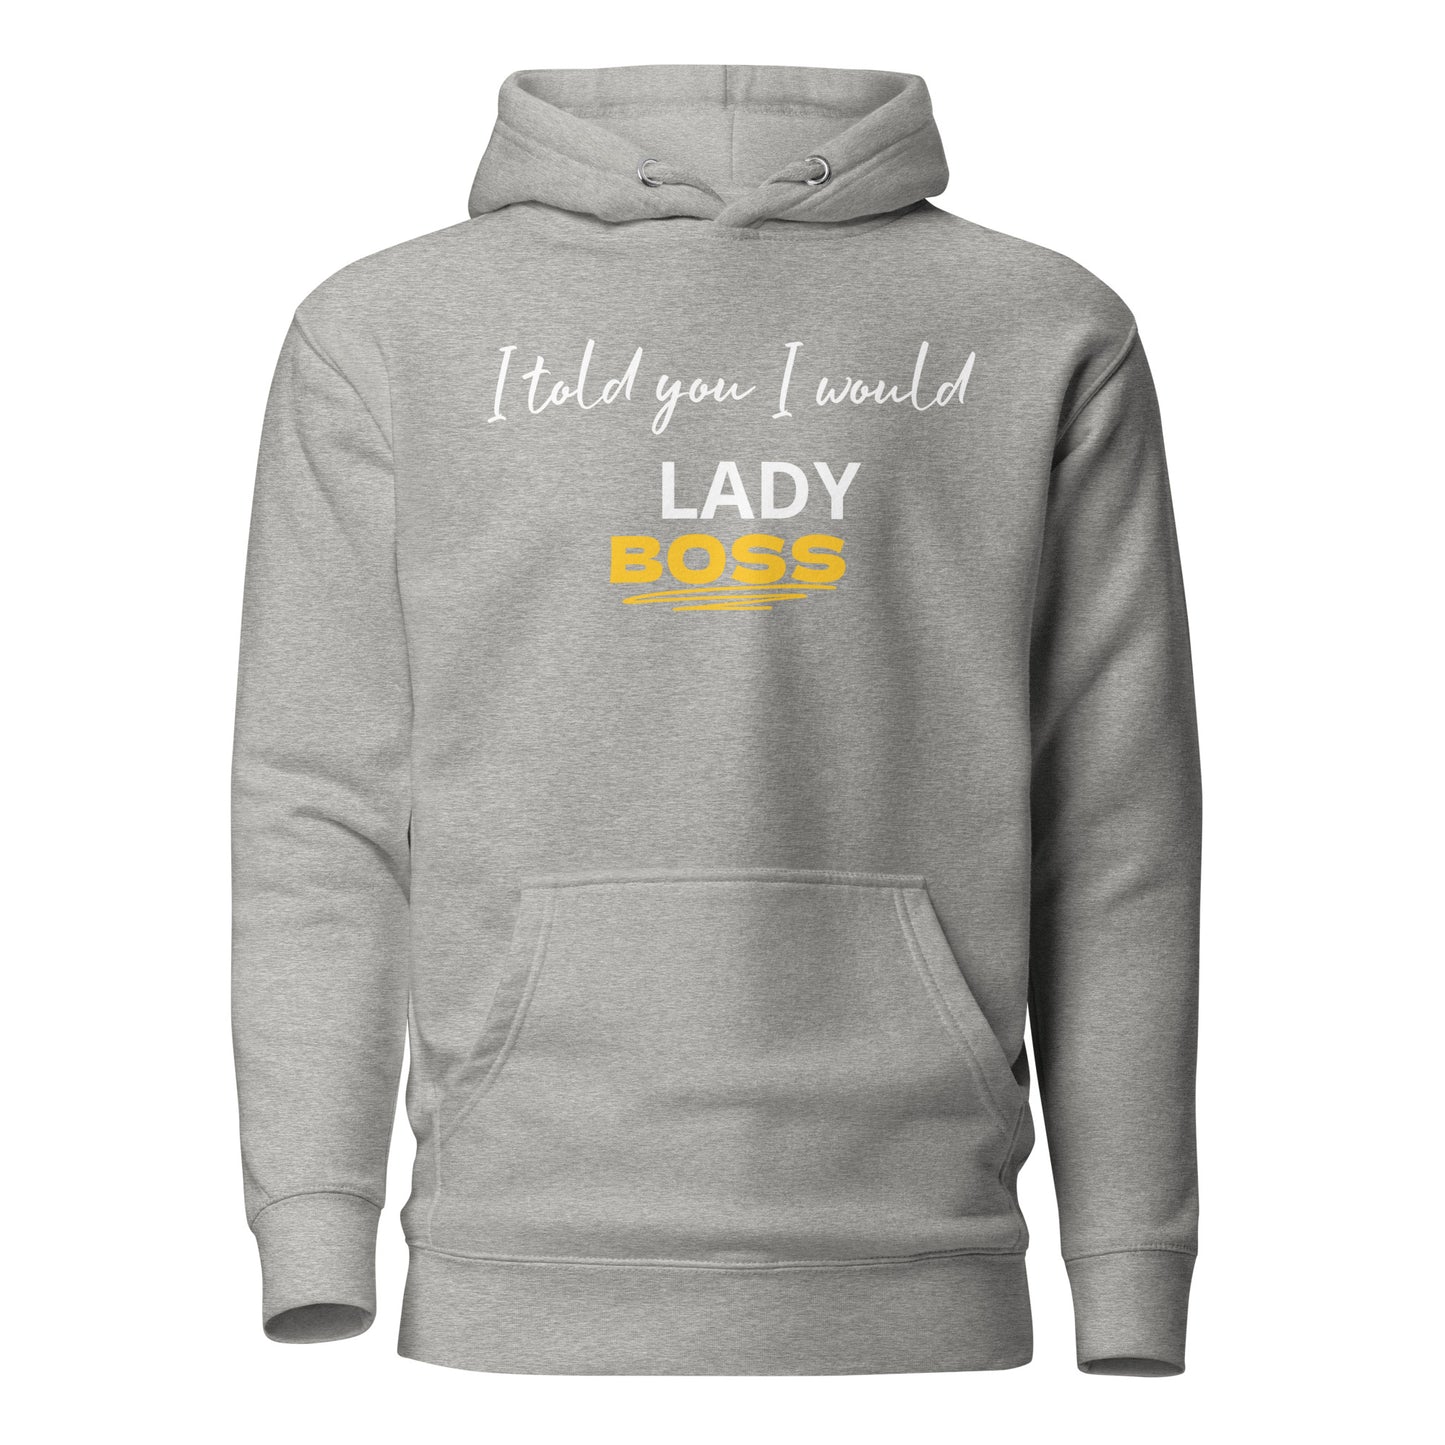 I told you I would LADY BOSS Unisex Hoodie, Self Hoodie